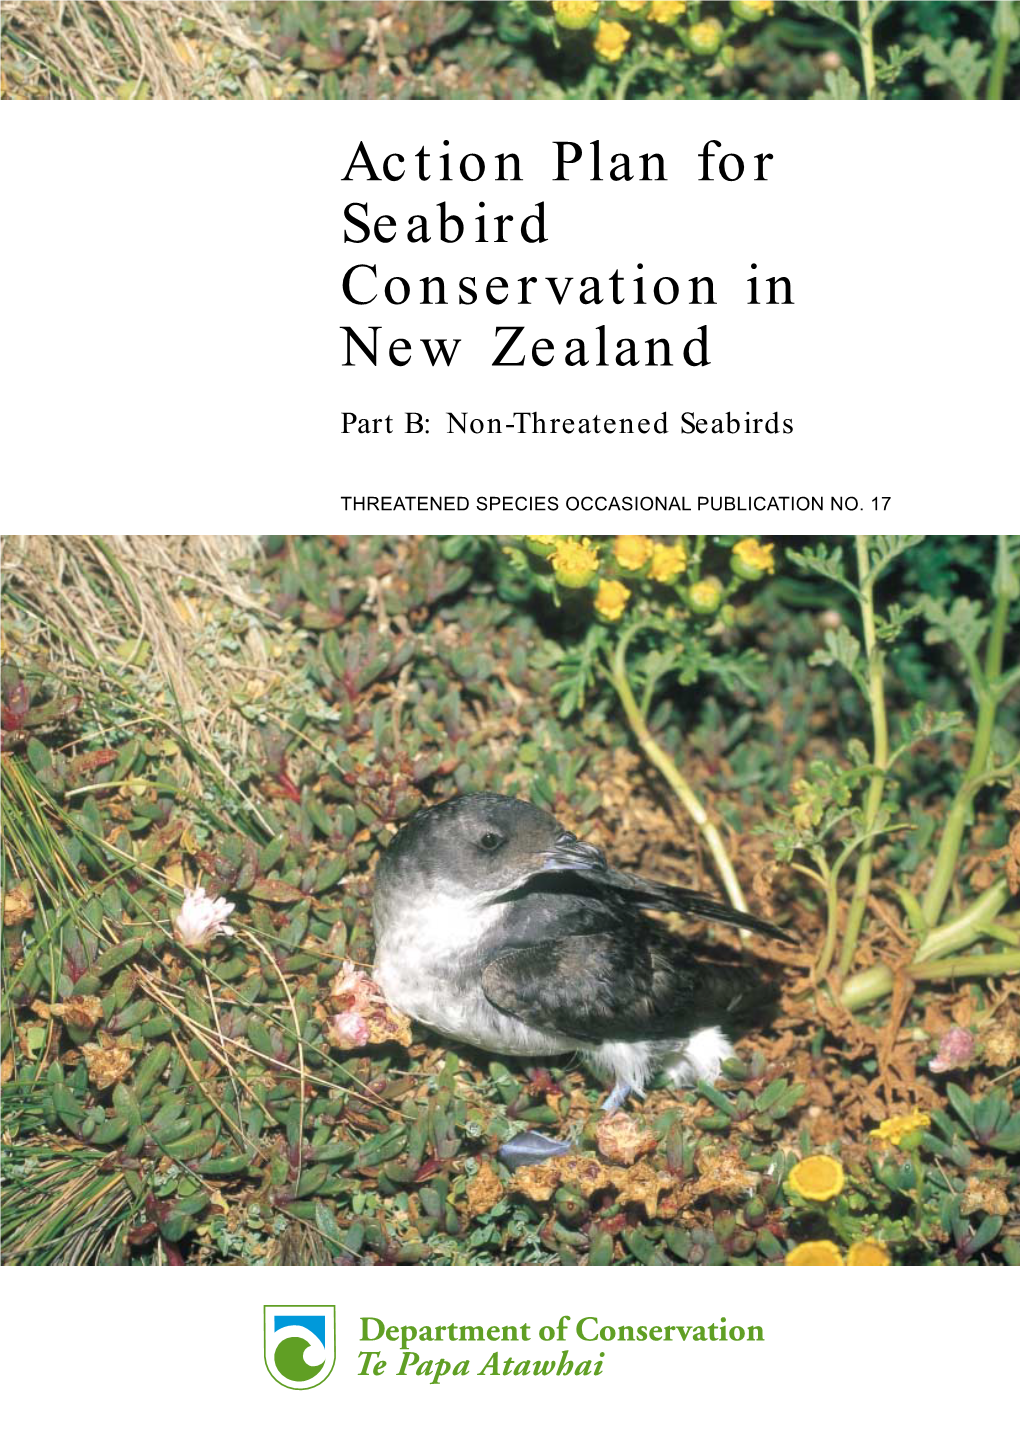 Action Plan for Seabird Conservation in New Zealand Part B: Non-Threatened Seabirds